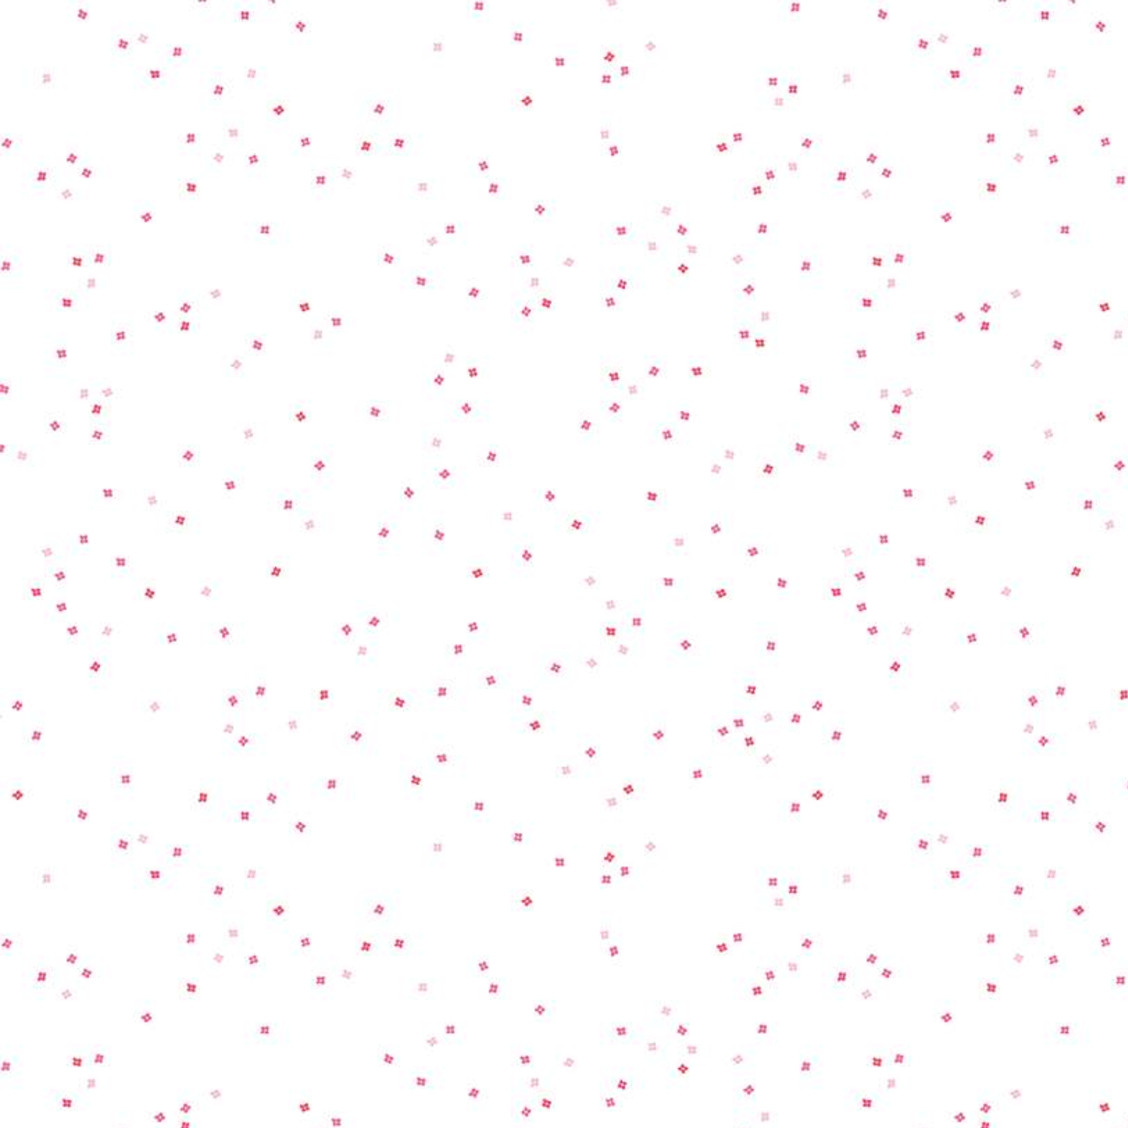 Blossom All the Pink Dot on White Fabric